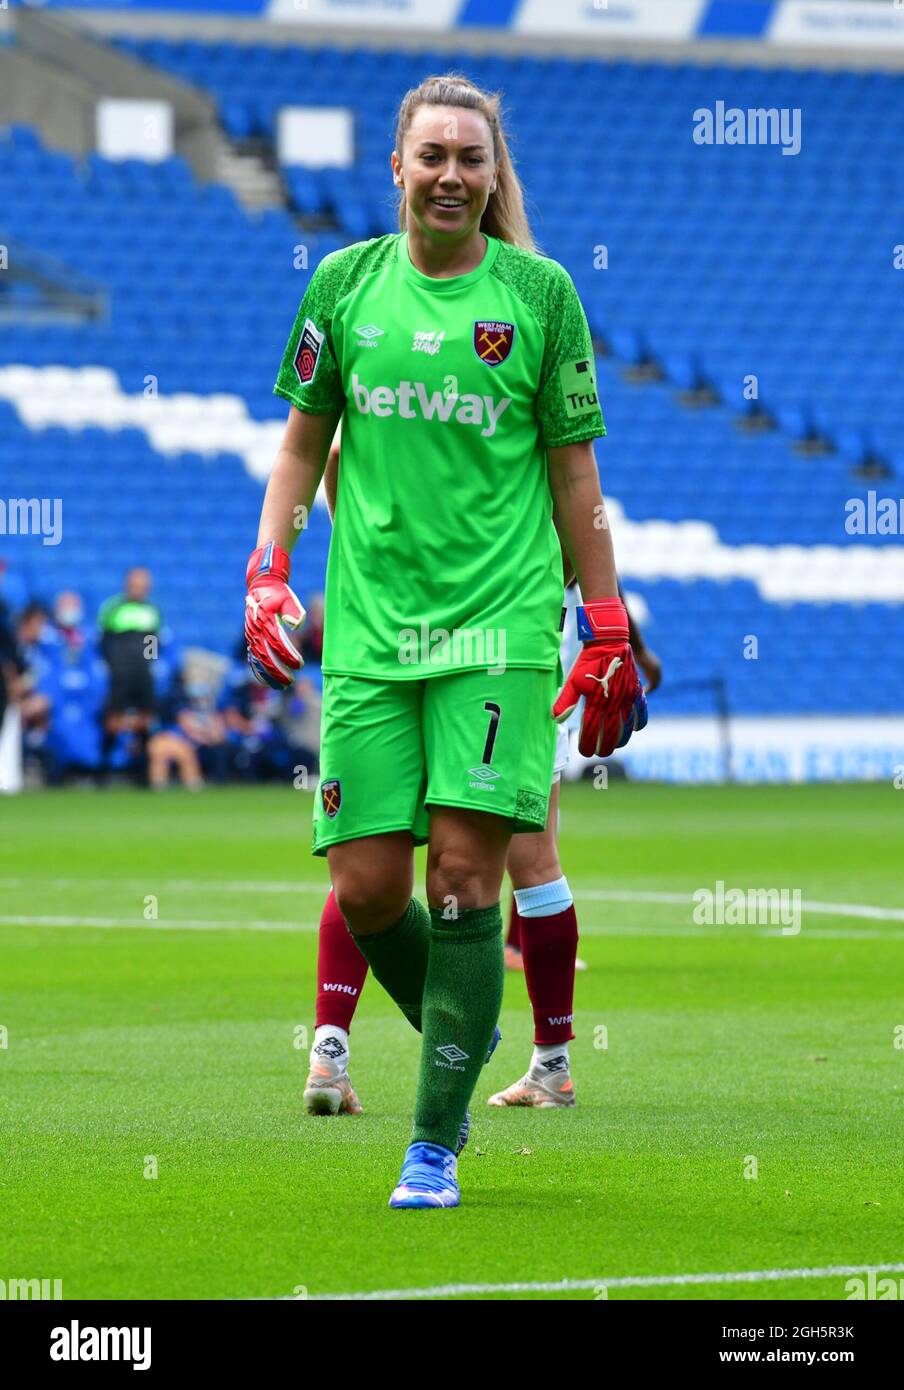 Brighton, UK. 05th Sep, 2021. Mackenzie Arnold Goalkeeper of West Ham United smiles after seeing a shot by Lee Geum-Min of Brighton and Hove Albion go wide during the FA Women's Super League match between Brighton & Hove Albion Women and West Ham United Ladies at The Amex Stadium on September 5th 2021 in Brighton, United Kingdom. (Photo by Jeff Mood/phcimages.com) Credit: PHC Images/Alamy Live News Stock Photo